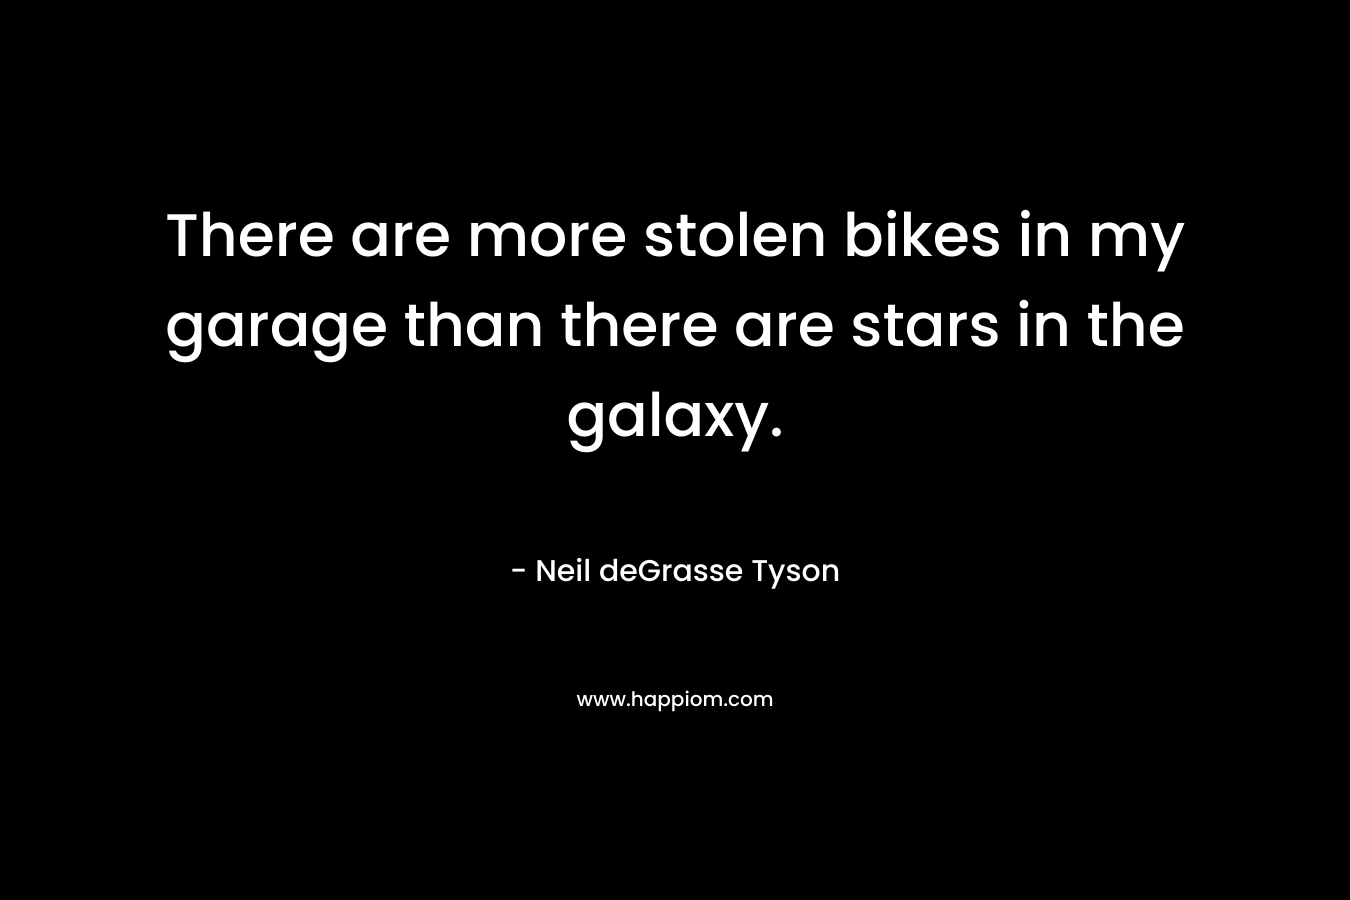 There are more stolen bikes in my garage than there are stars in the galaxy.